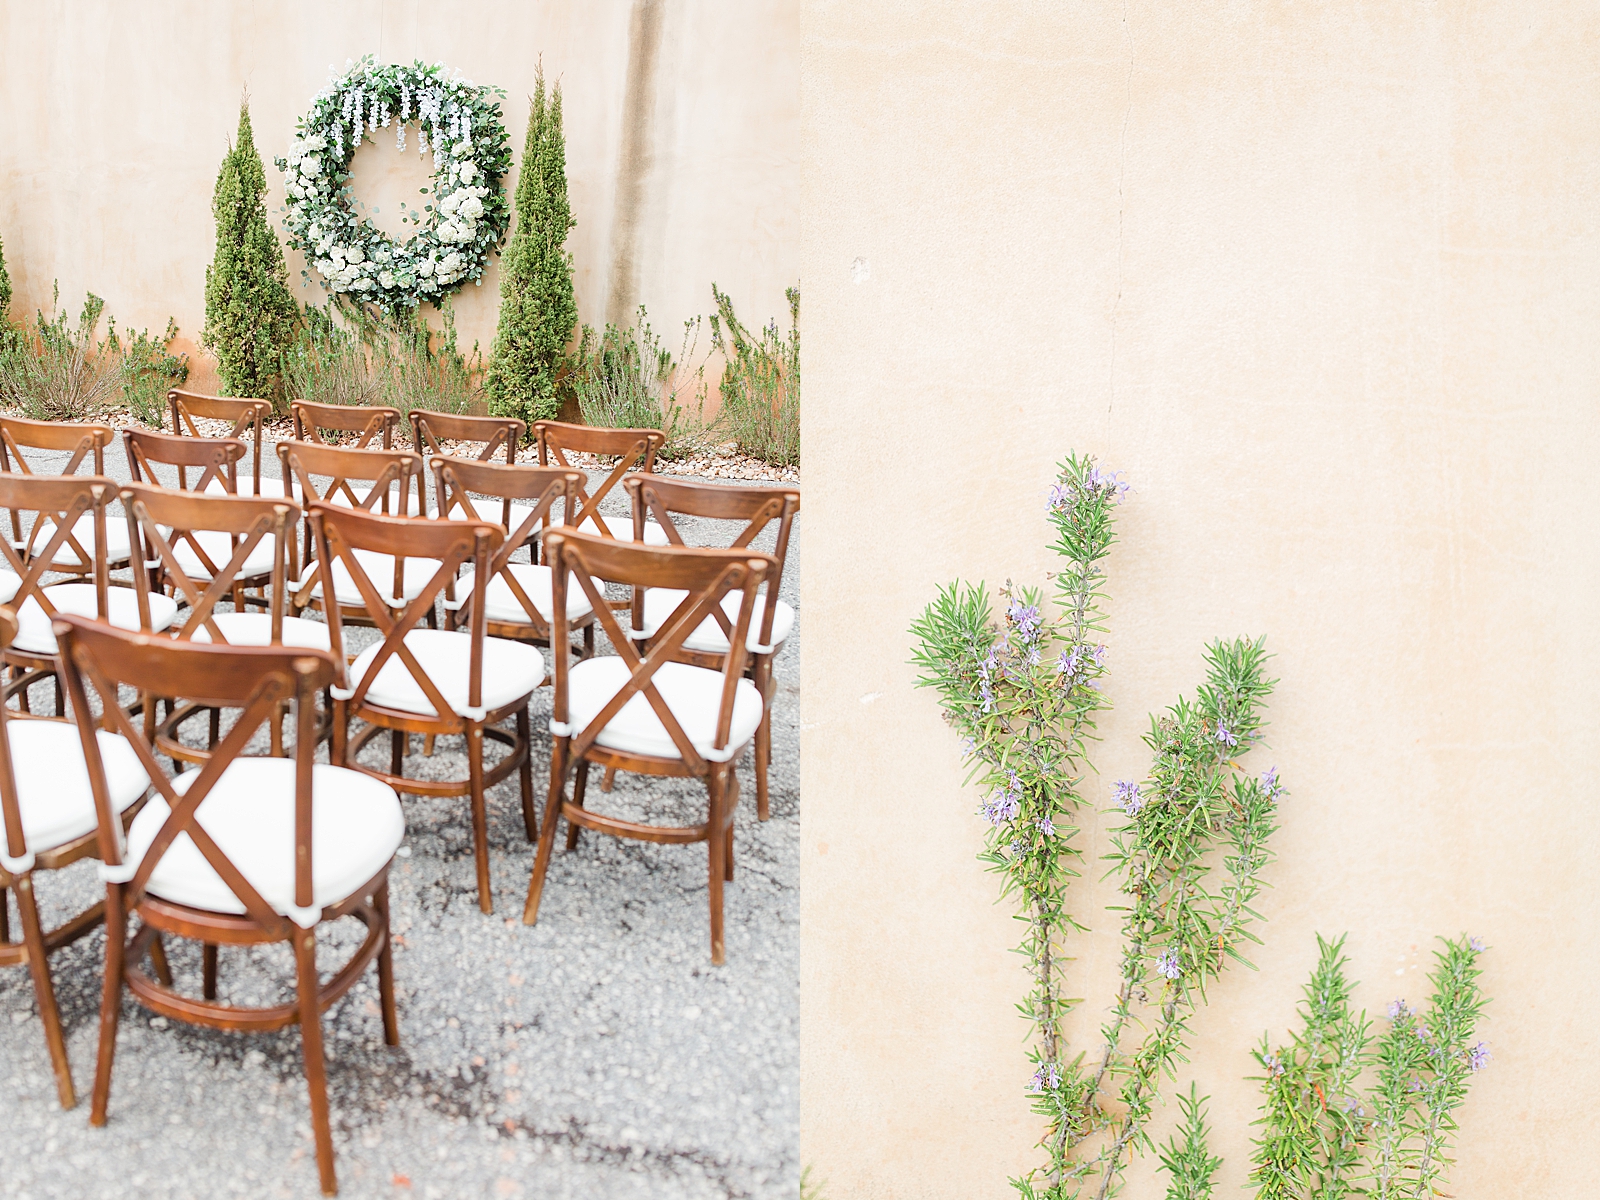 Montaluce Winery Wedding Reception Chairs in front of Floral Wreath Alter and Purple Flowers on wall photos